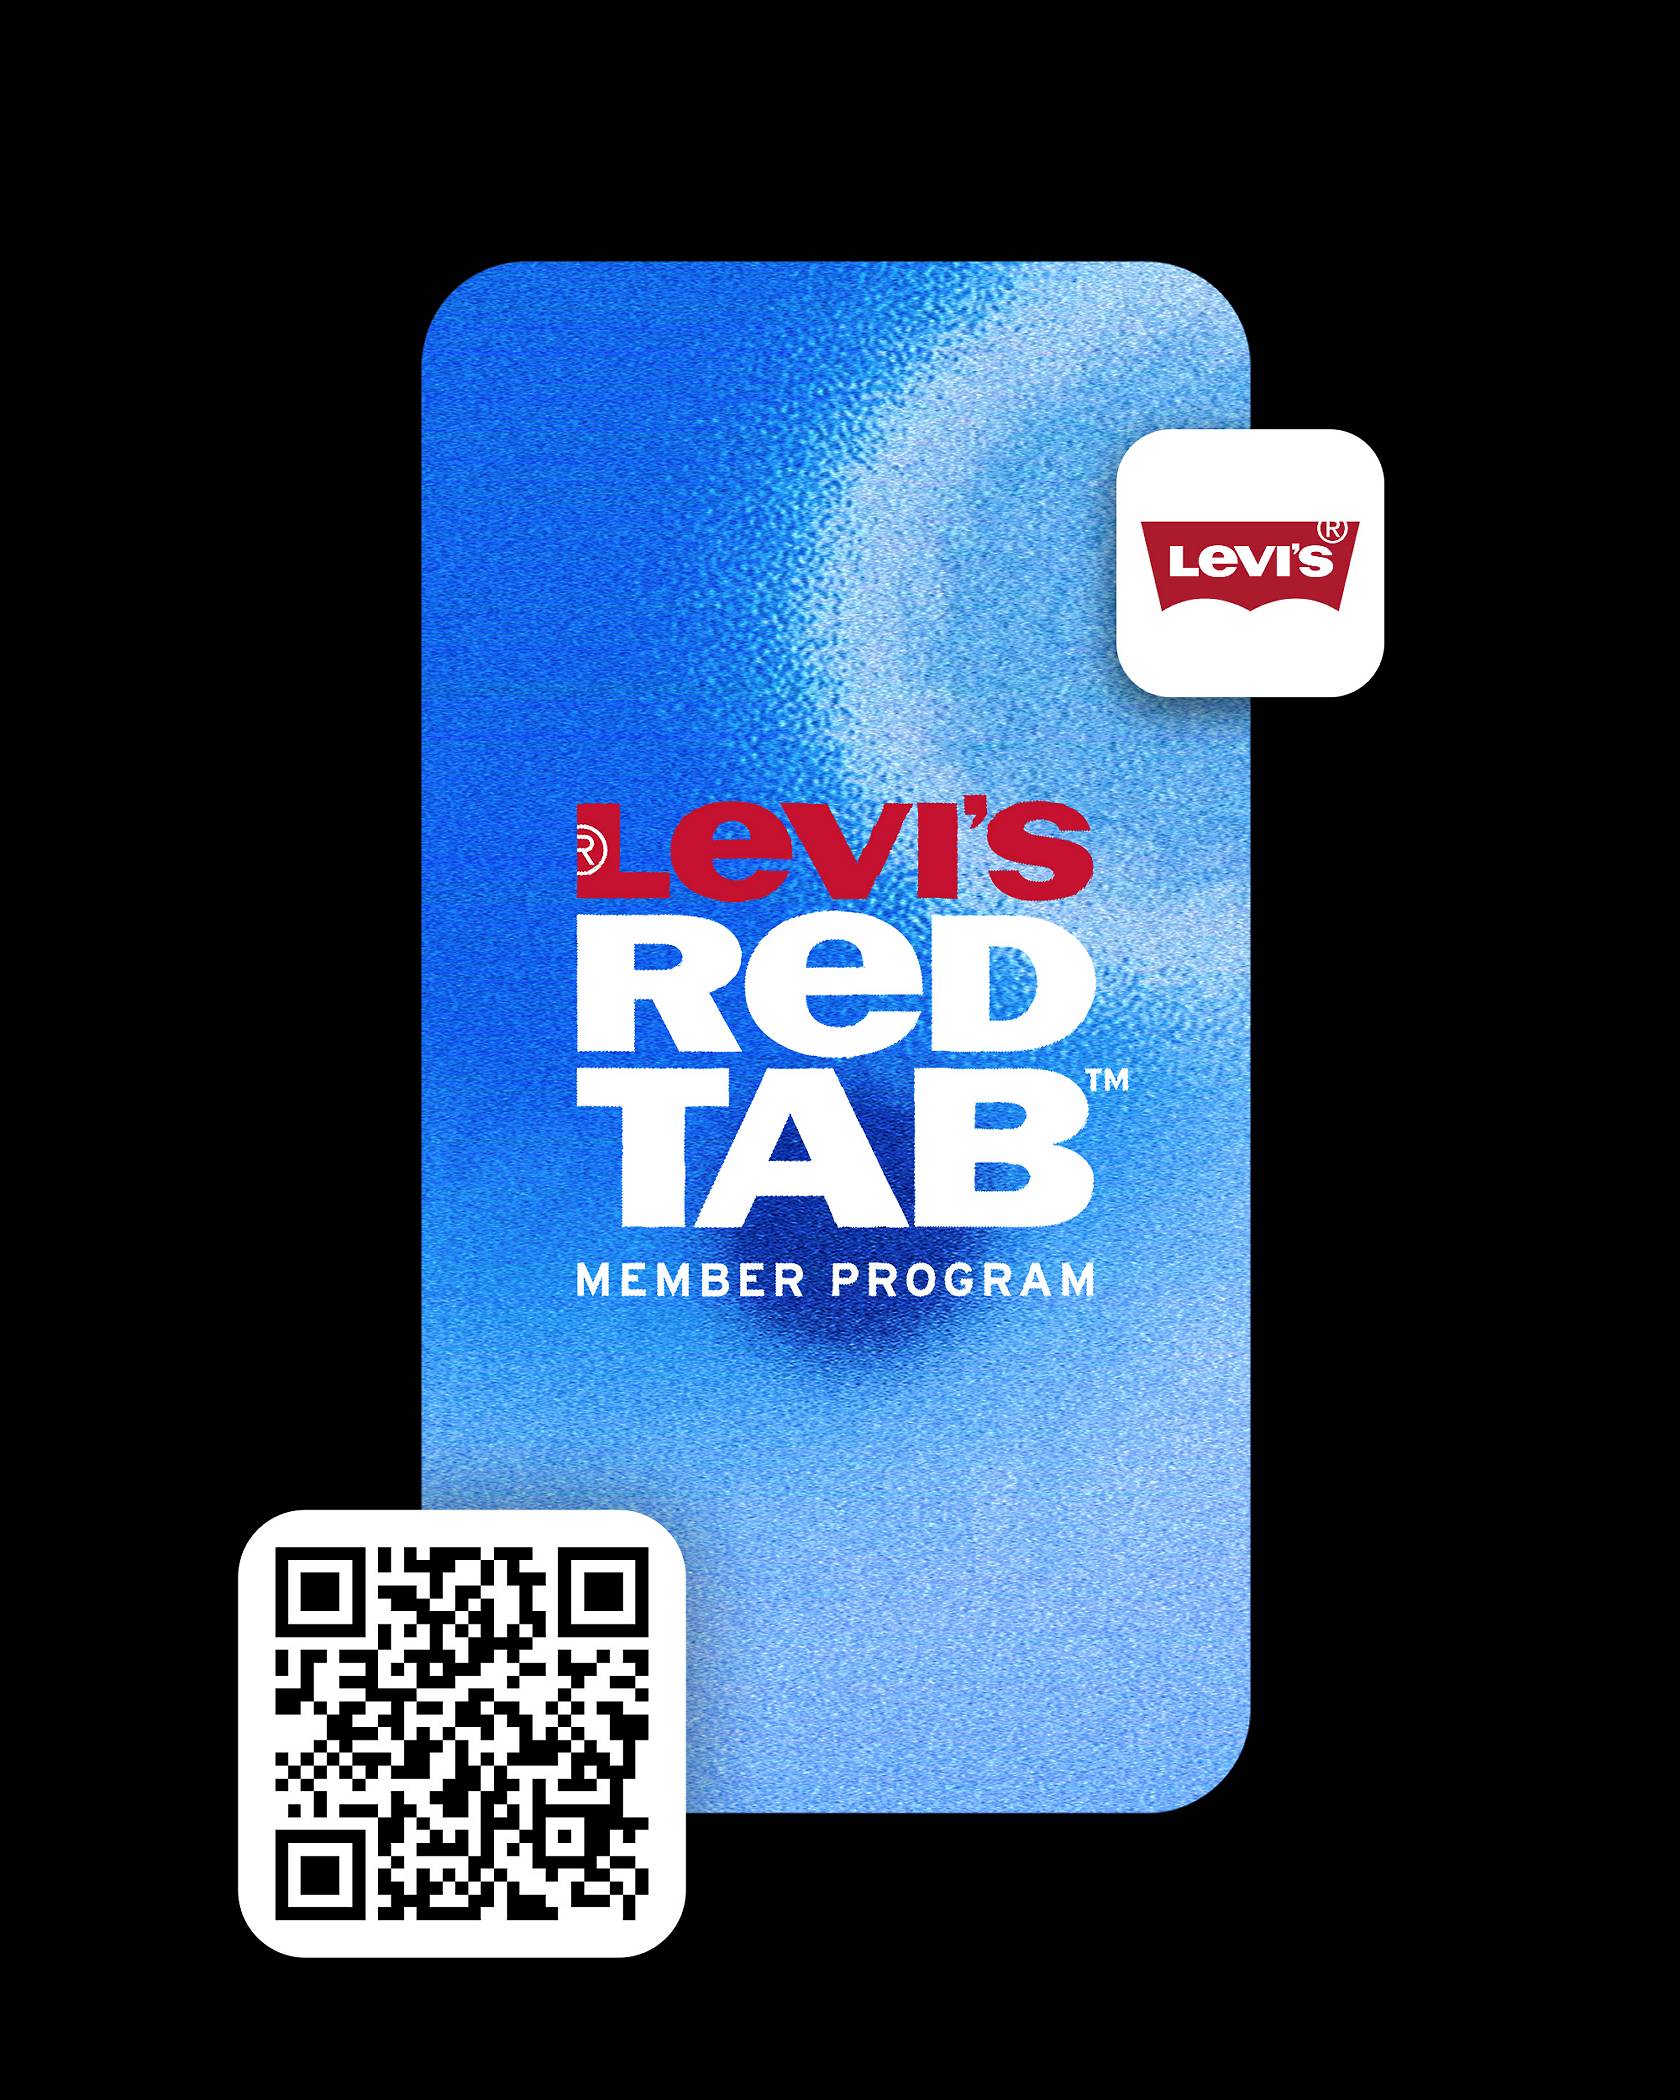 Phone shaped screen showcasing textured blue background with the Red Tab™ logo, the Levi's® App Store icon and a scannable QR code